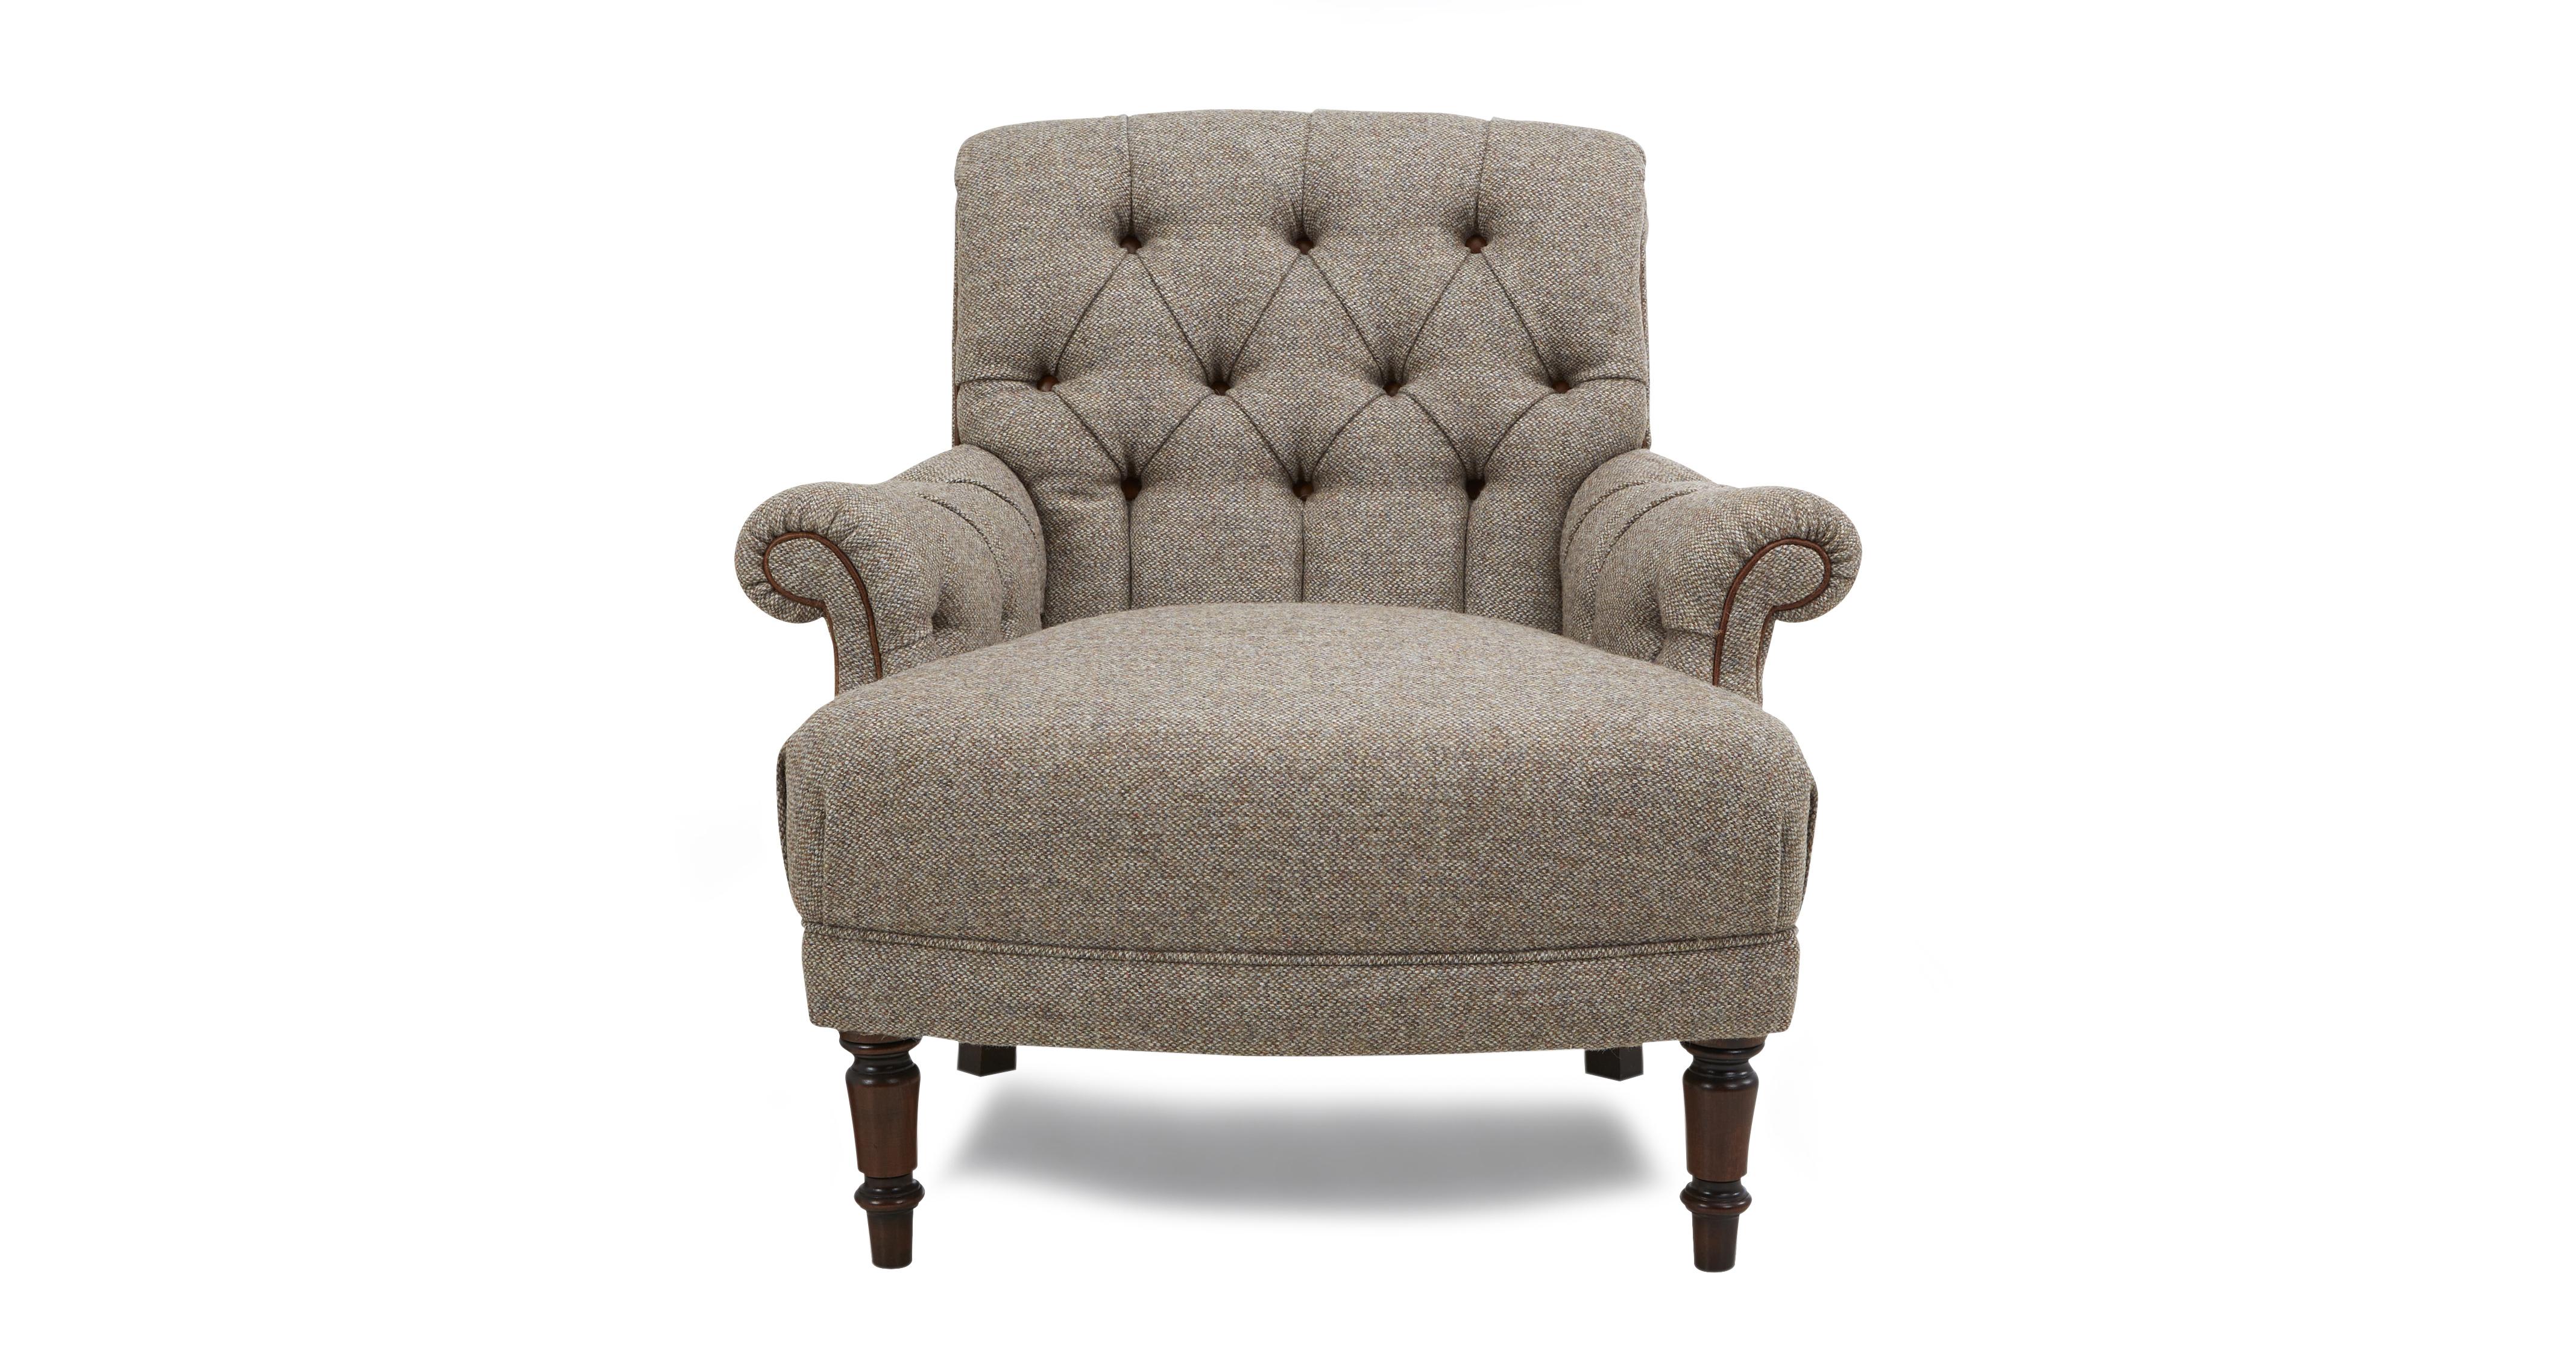 Chairs Chaise Longue Swivel And Snuggle Chairs DFS